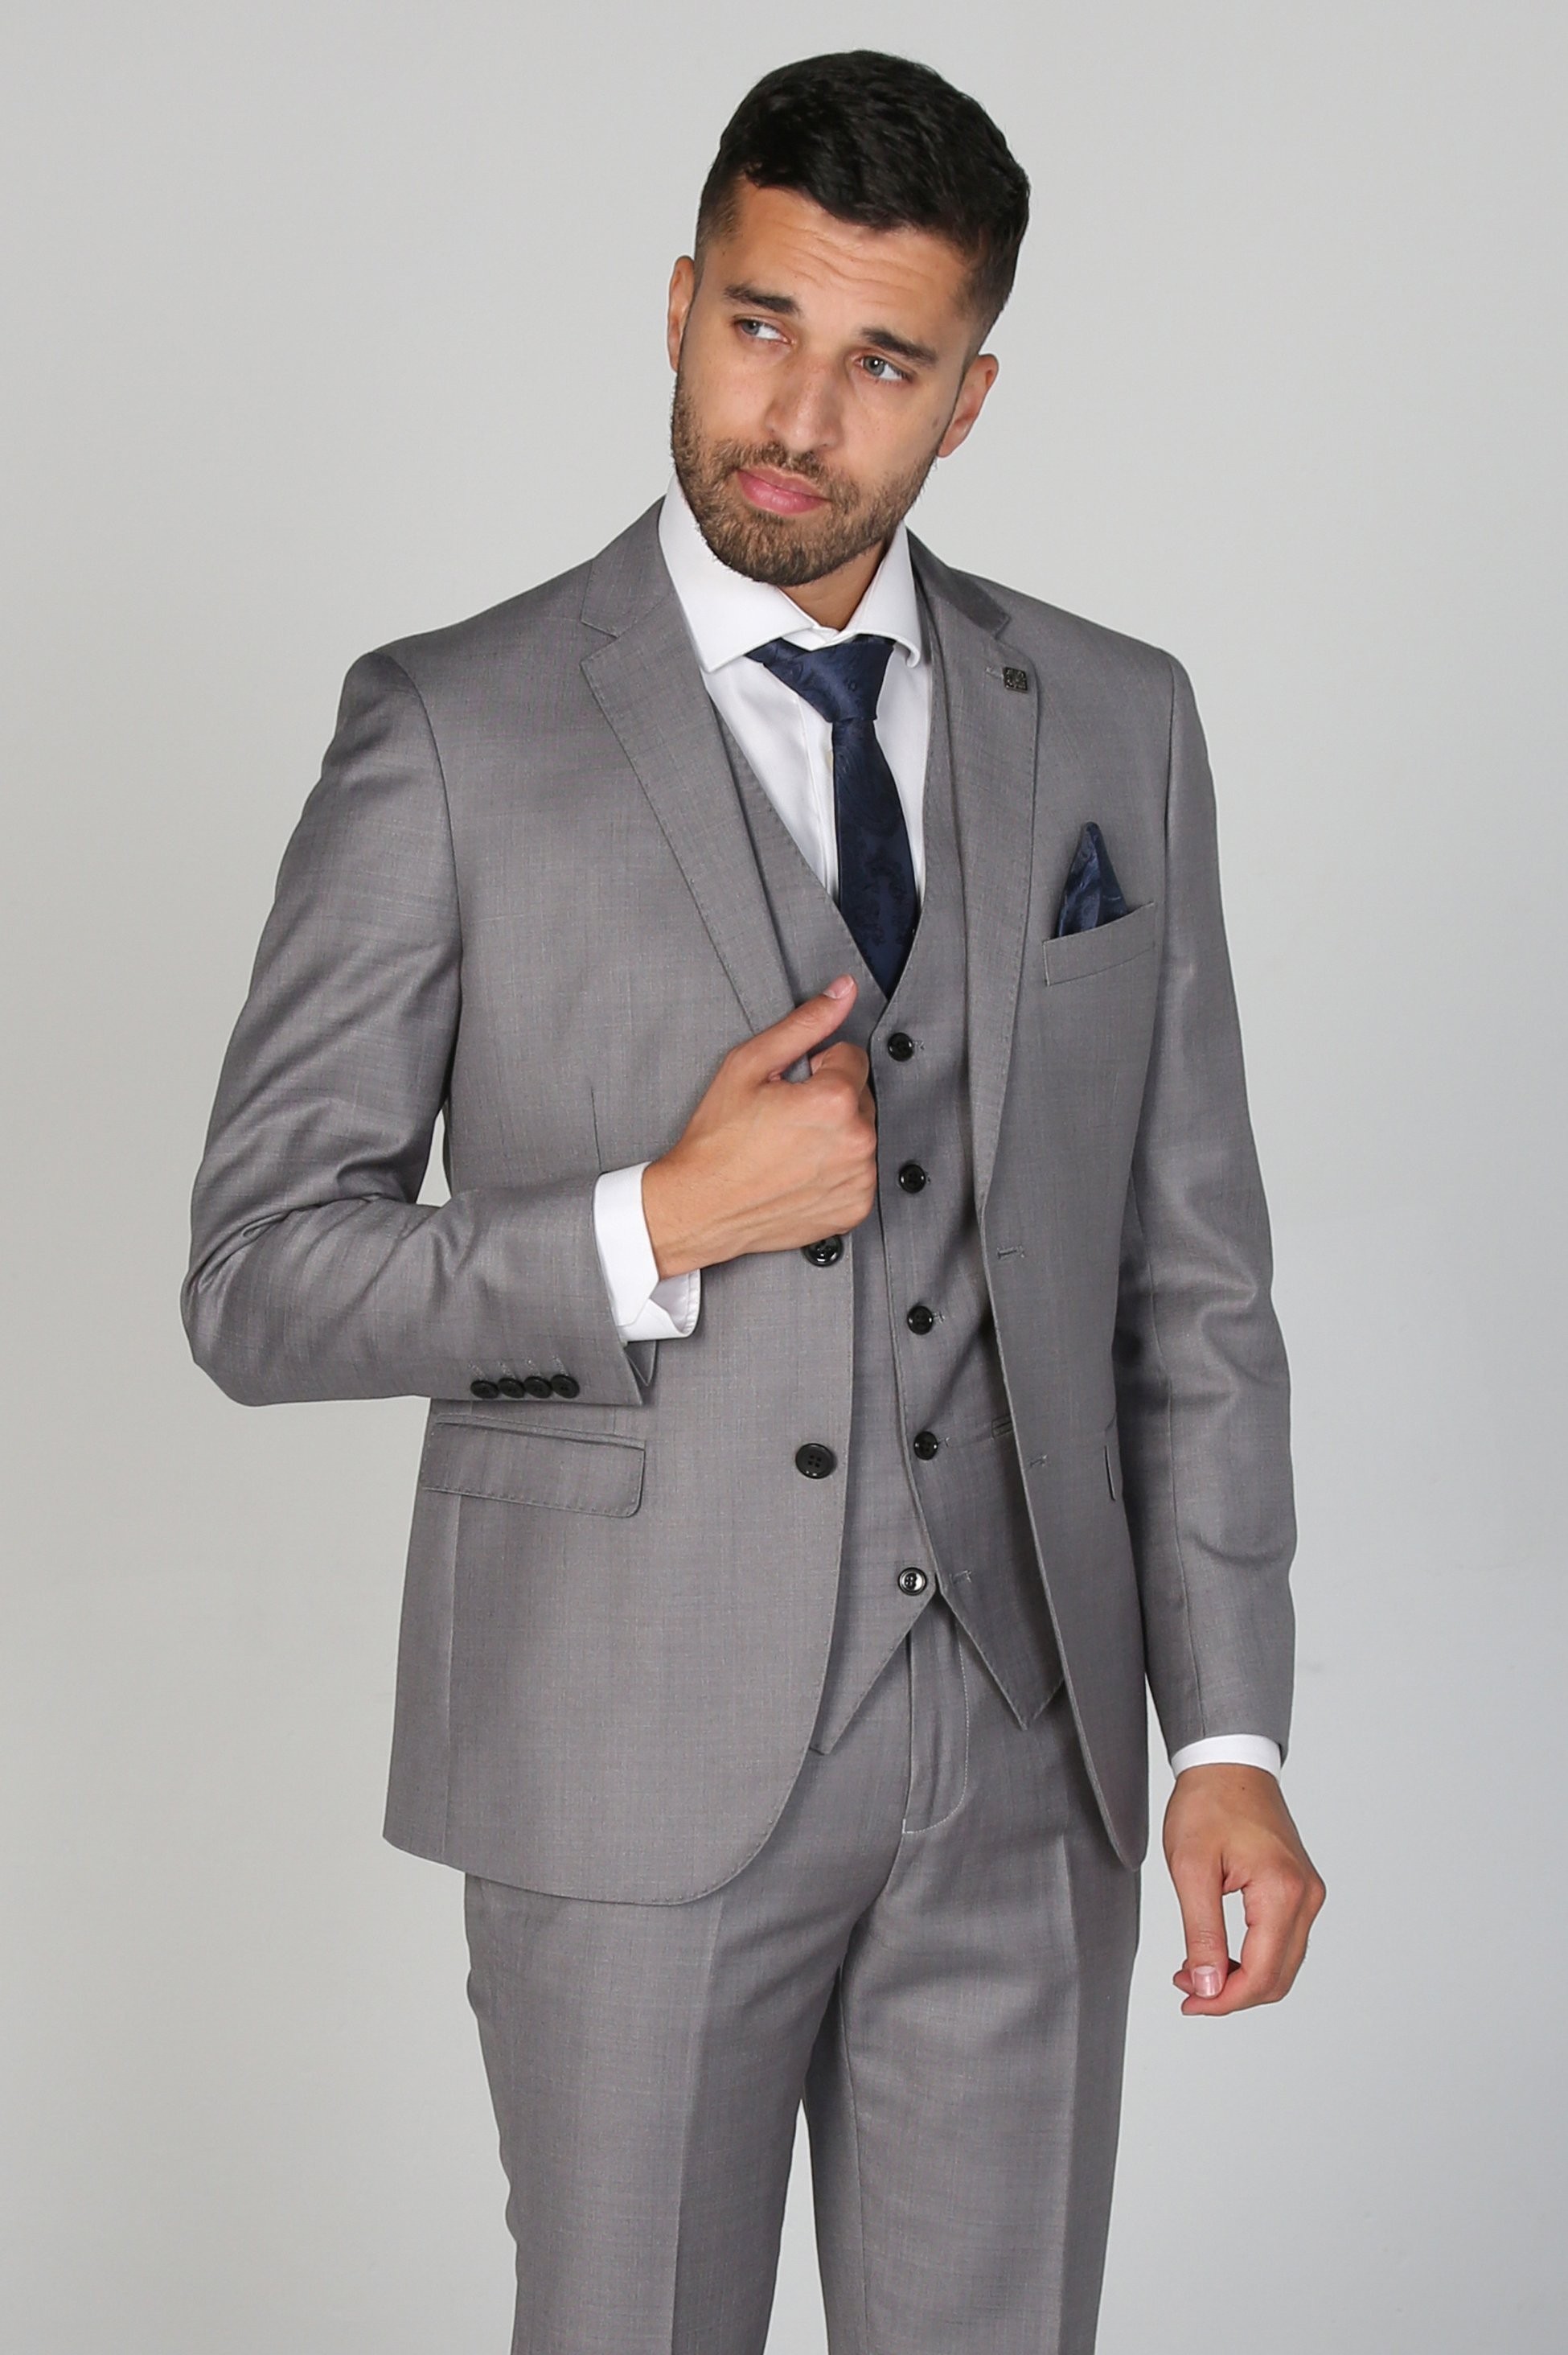 Men's Tailored Fit Formal Suit  - CHARLES - Light Grey